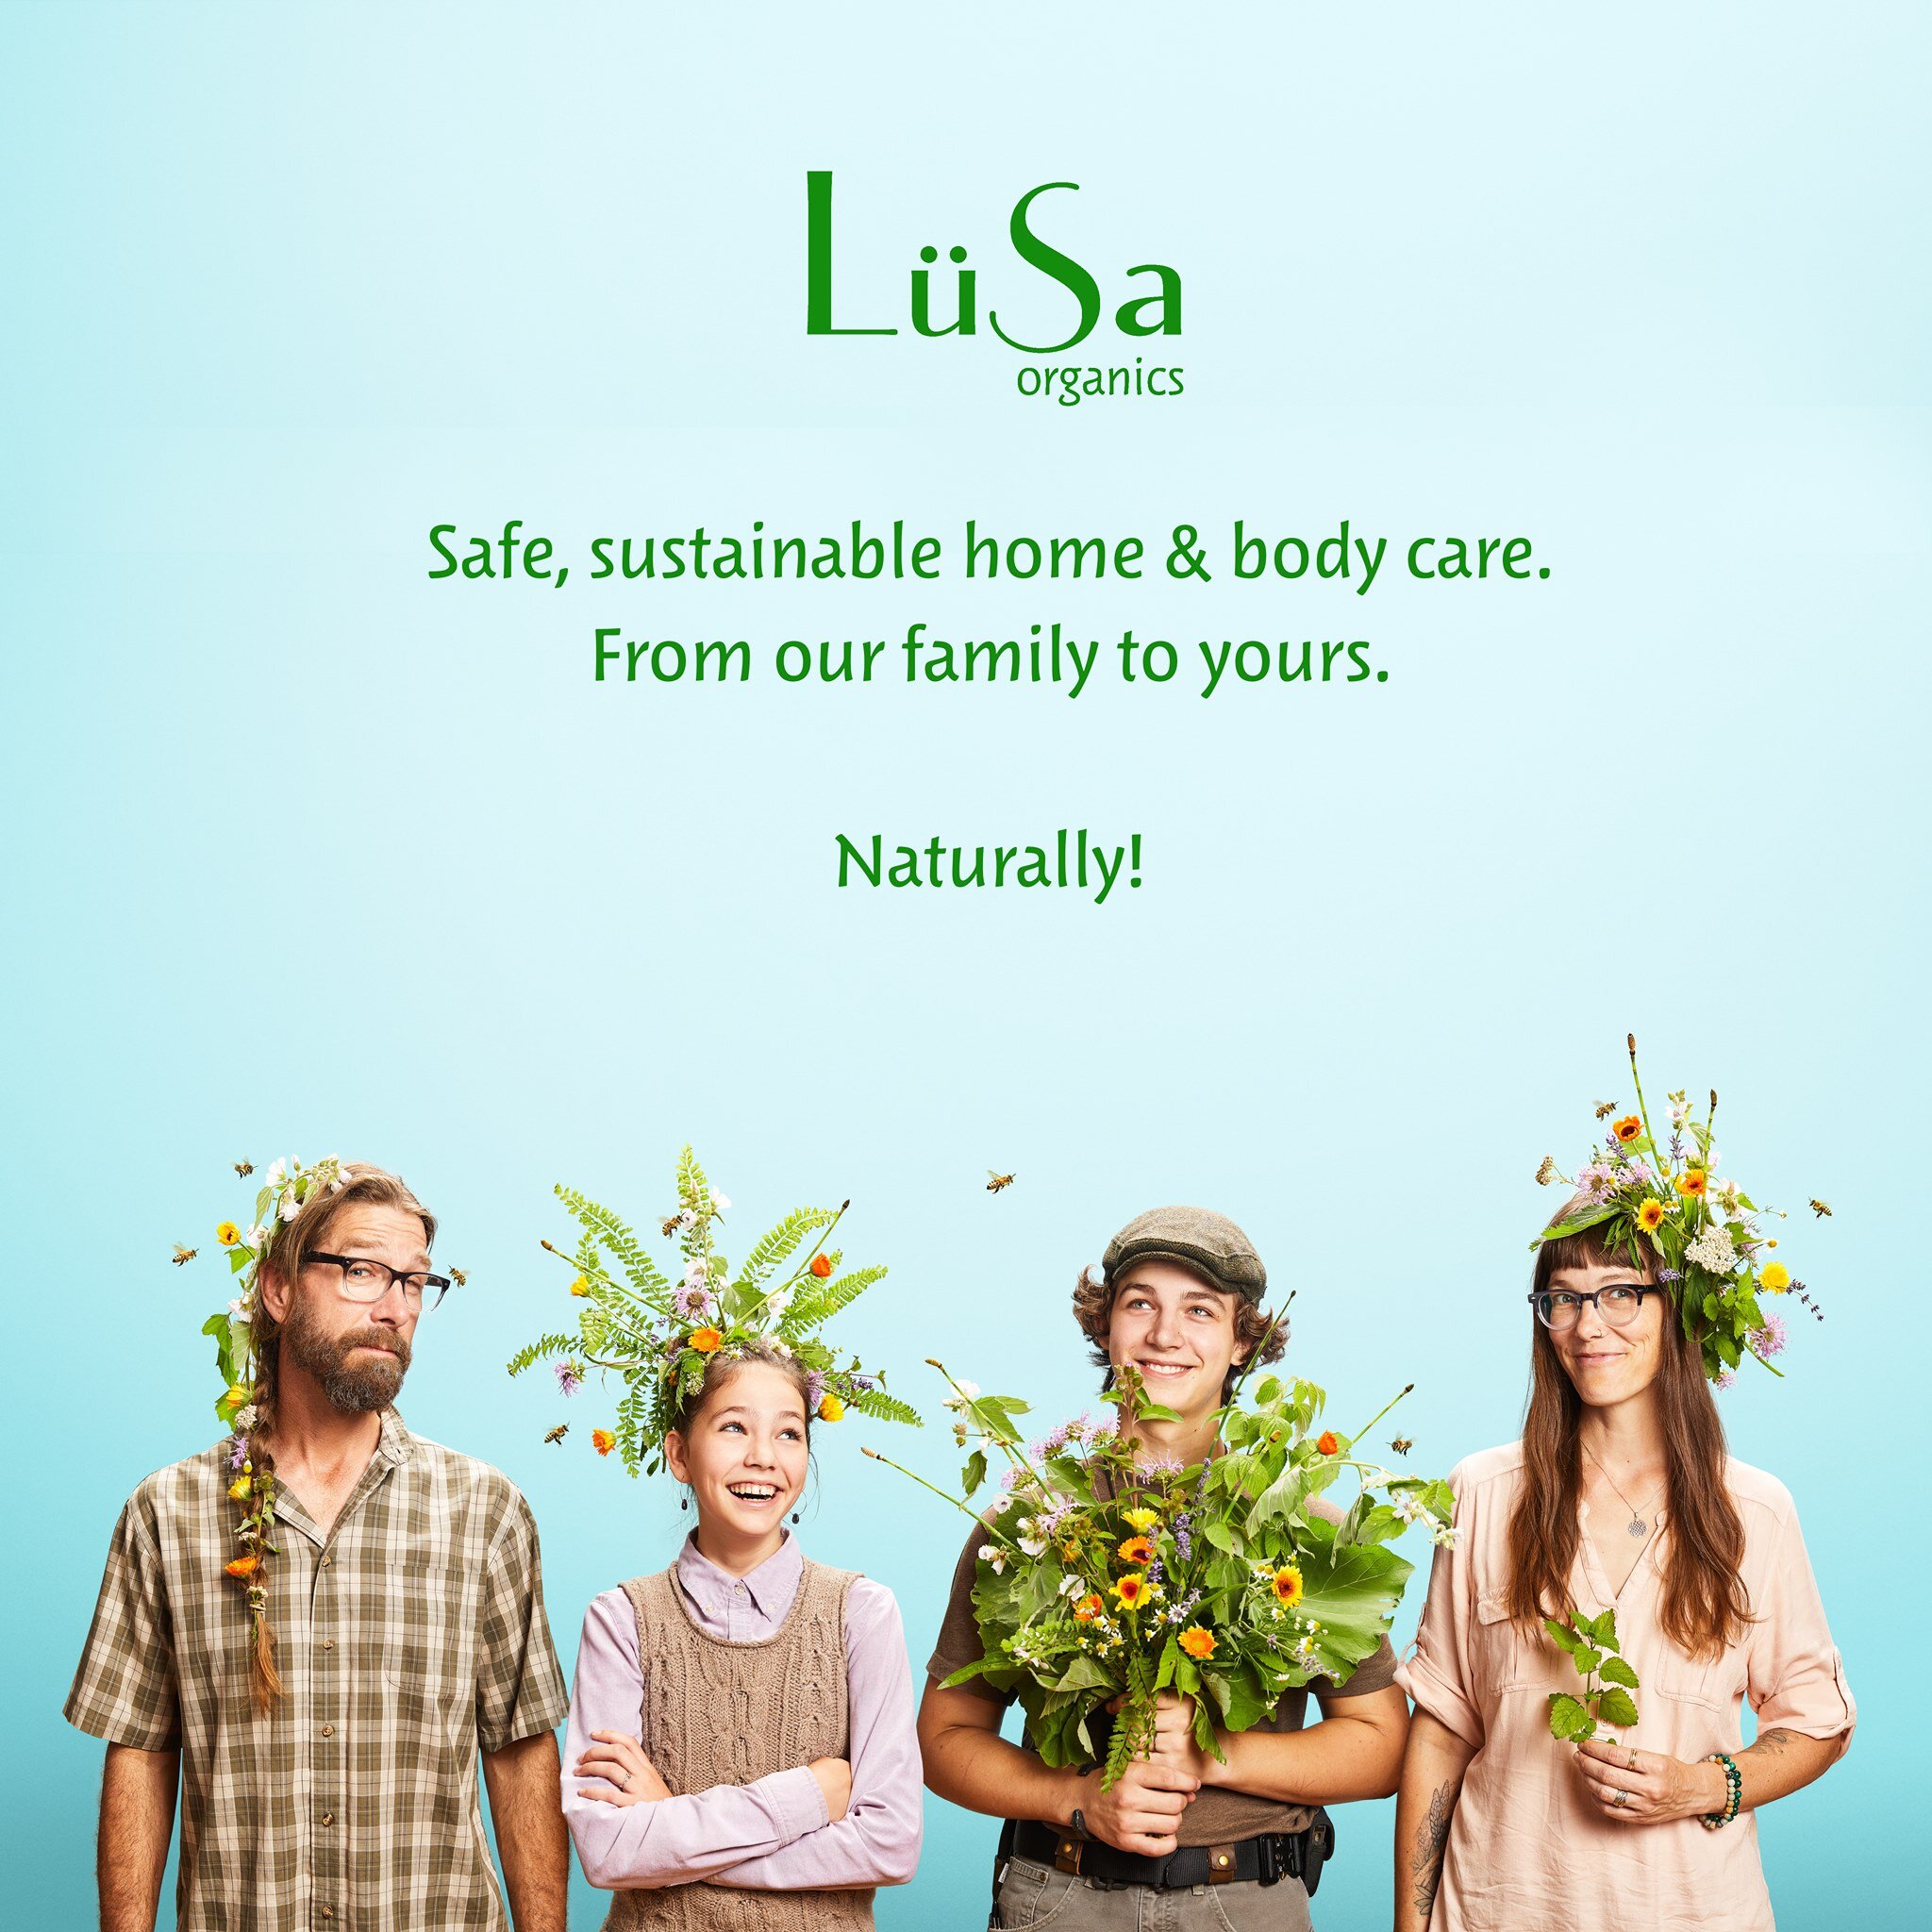 quirky commercial family portrait promoting home and body care company LuSa Organics shot in studio with herbal crowns and bouquet